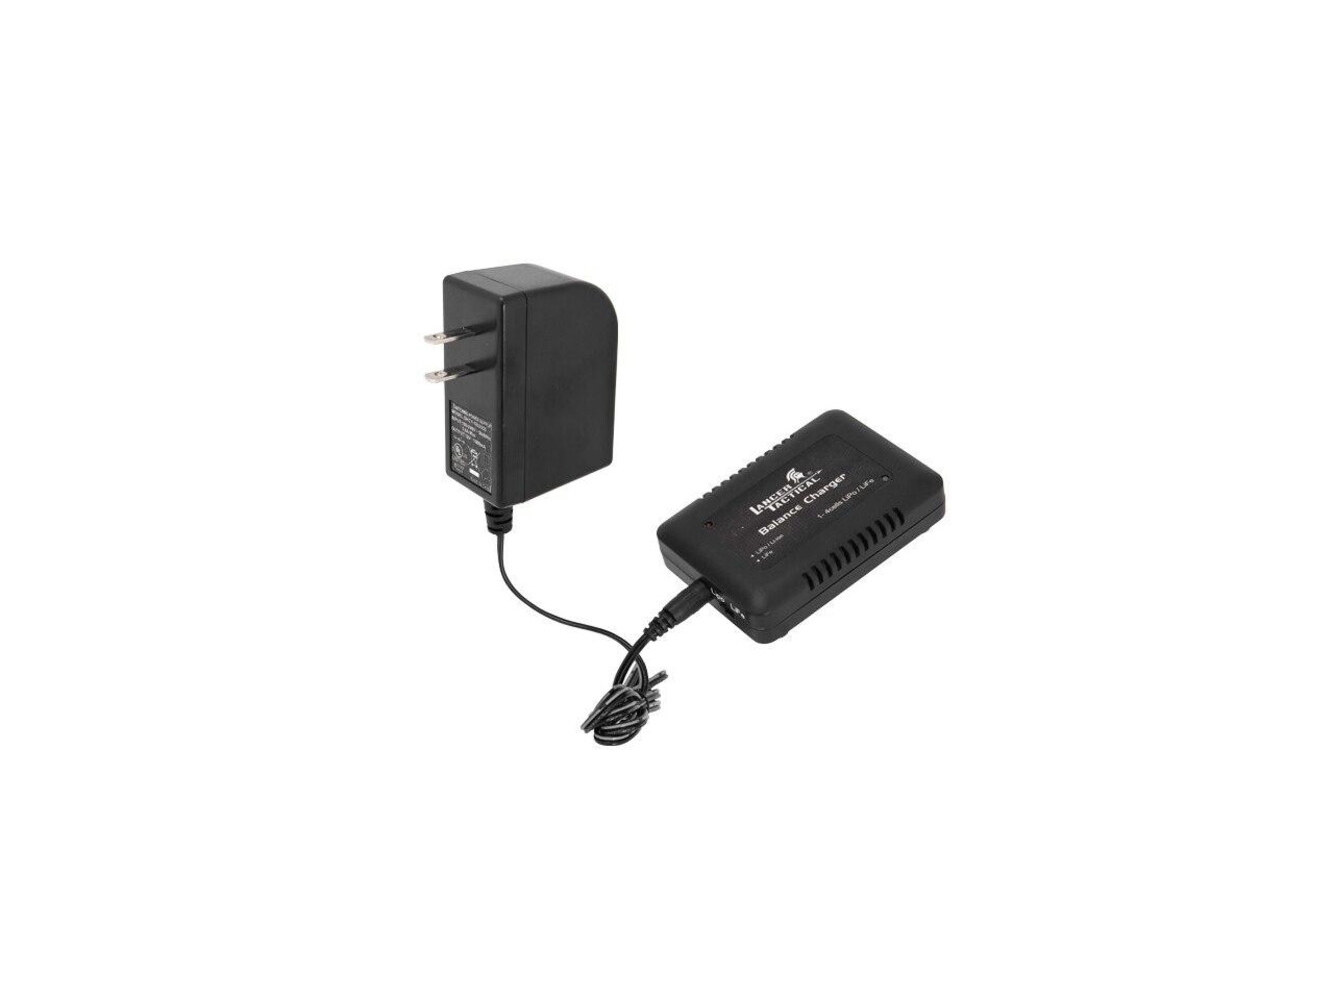 Lancer Tactical LiPO Smart Charger, 1-4 Cells